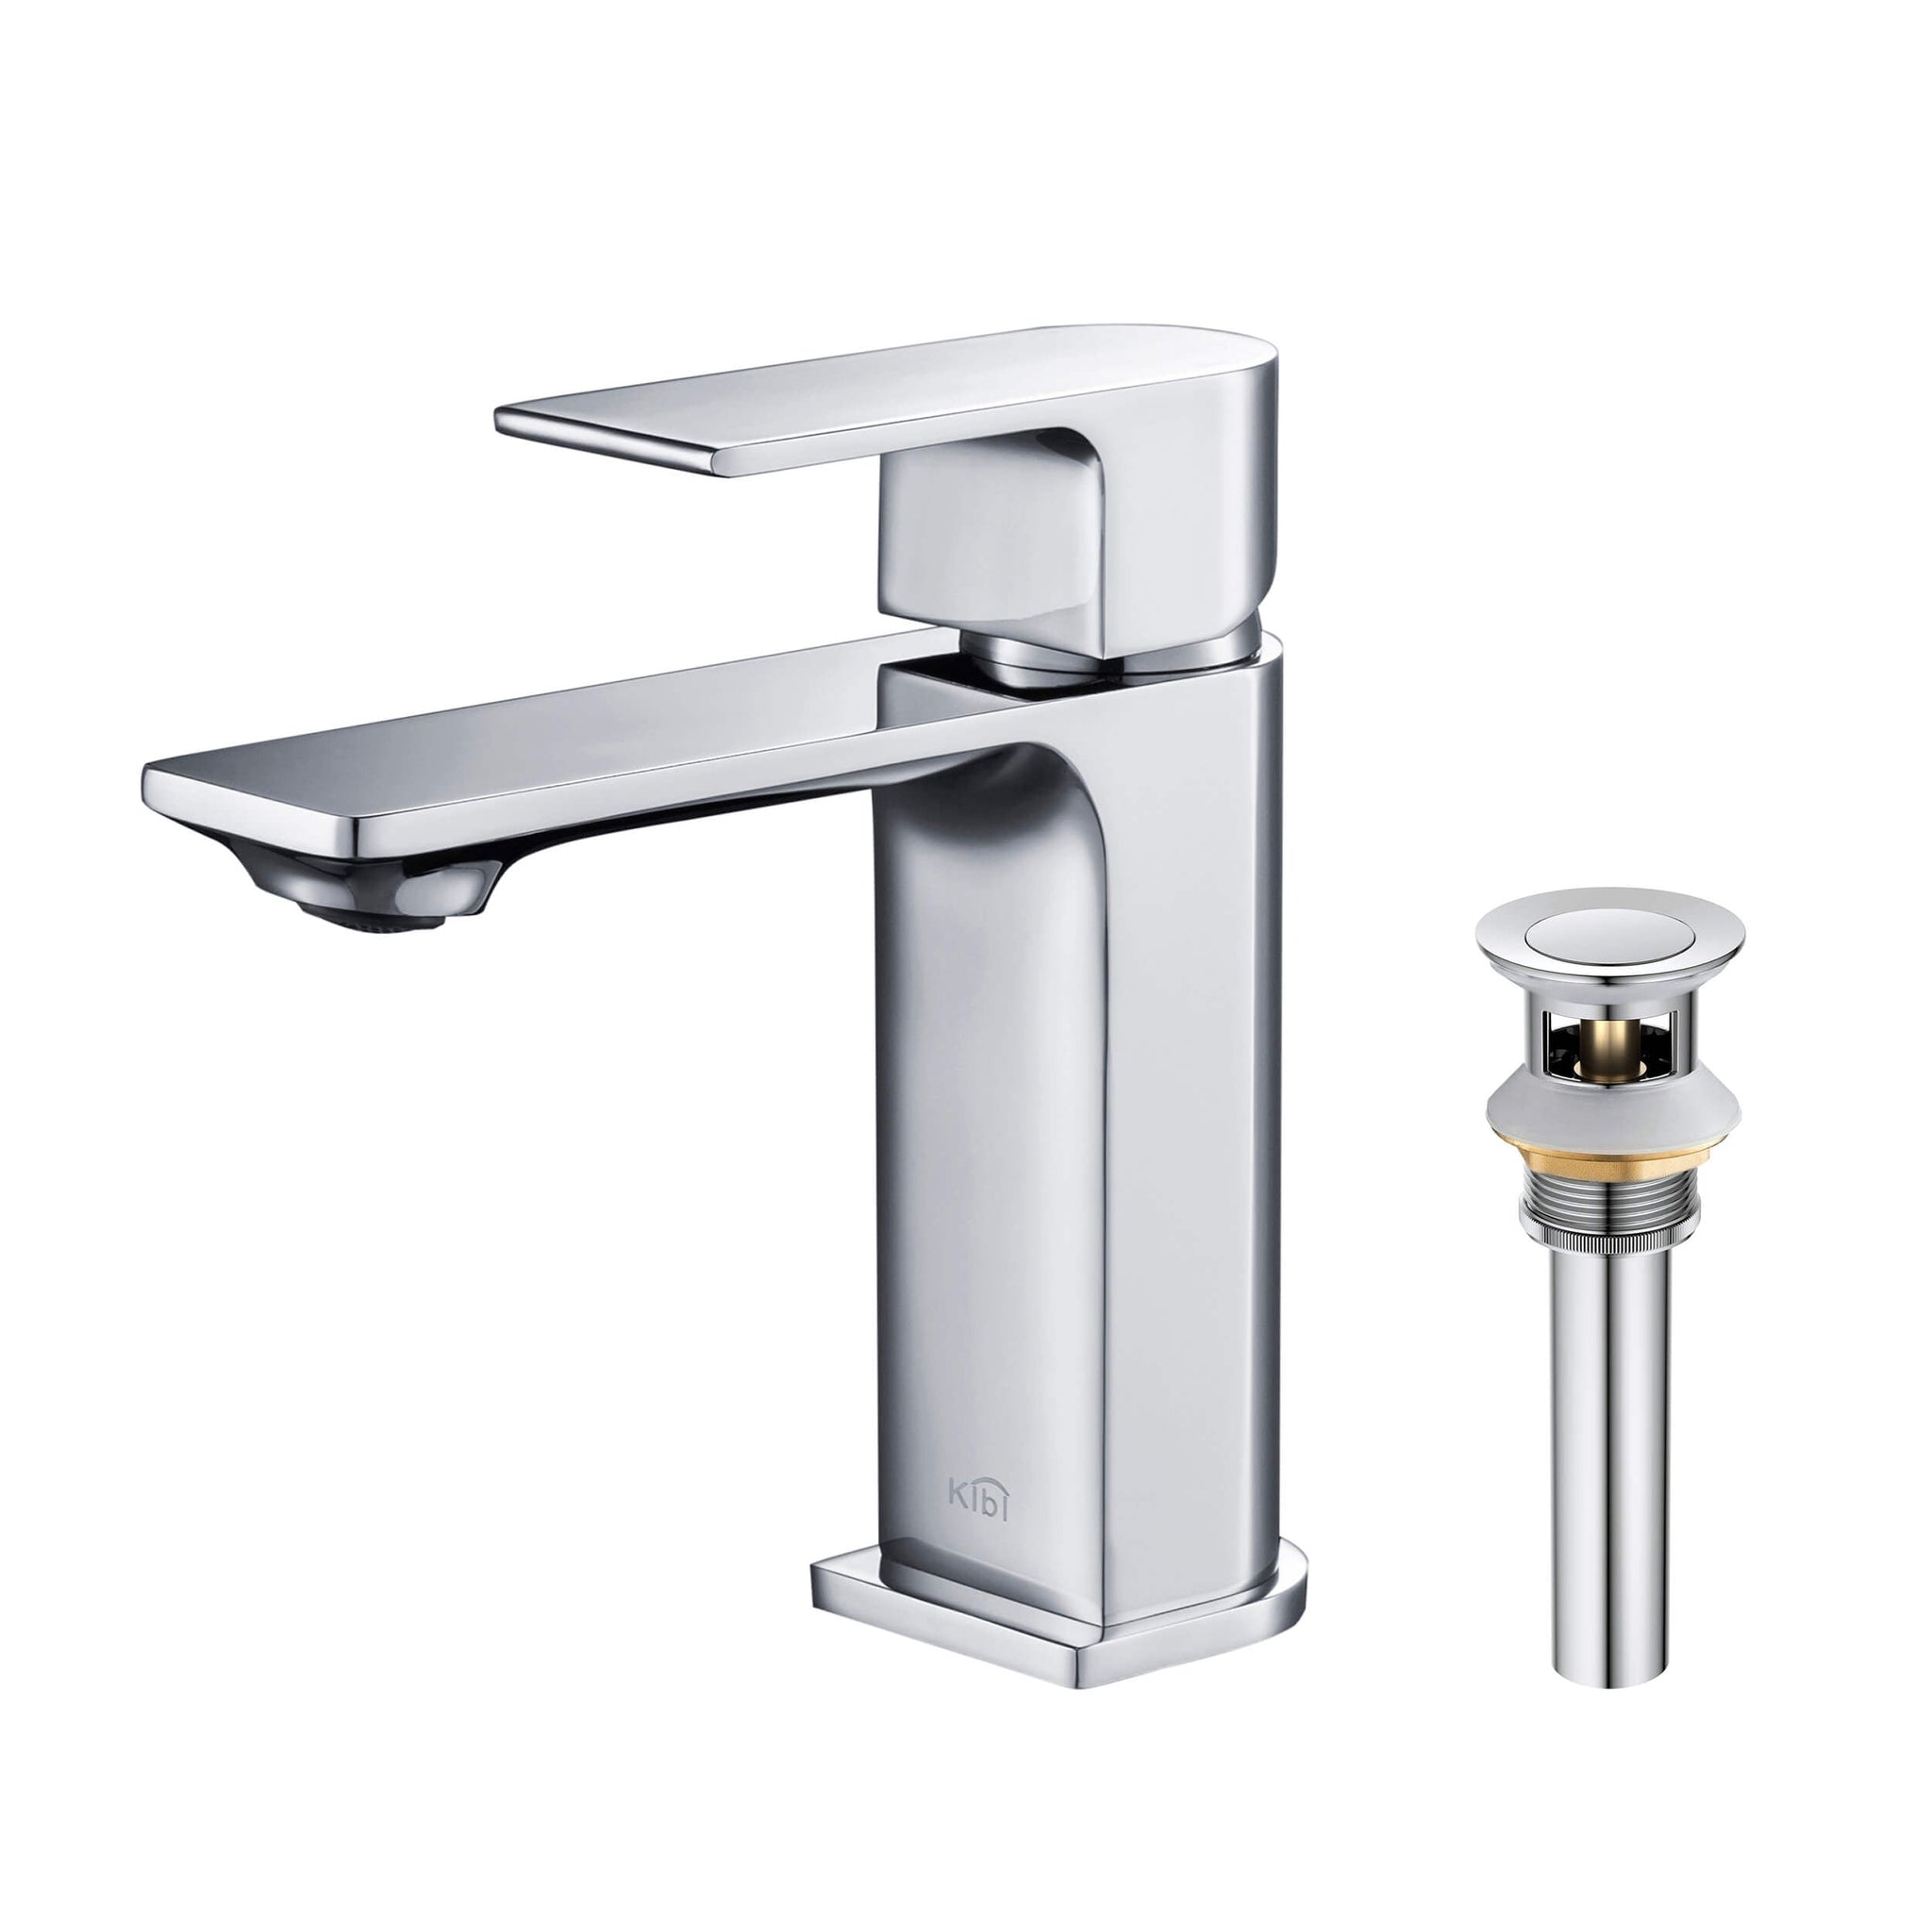 KIBI, KIBI Mirage Single Handle Chrome Solid Brass Bathroom Vanity Sink Faucet With Pop-Up Drain Stopper Small Cover With Overflow